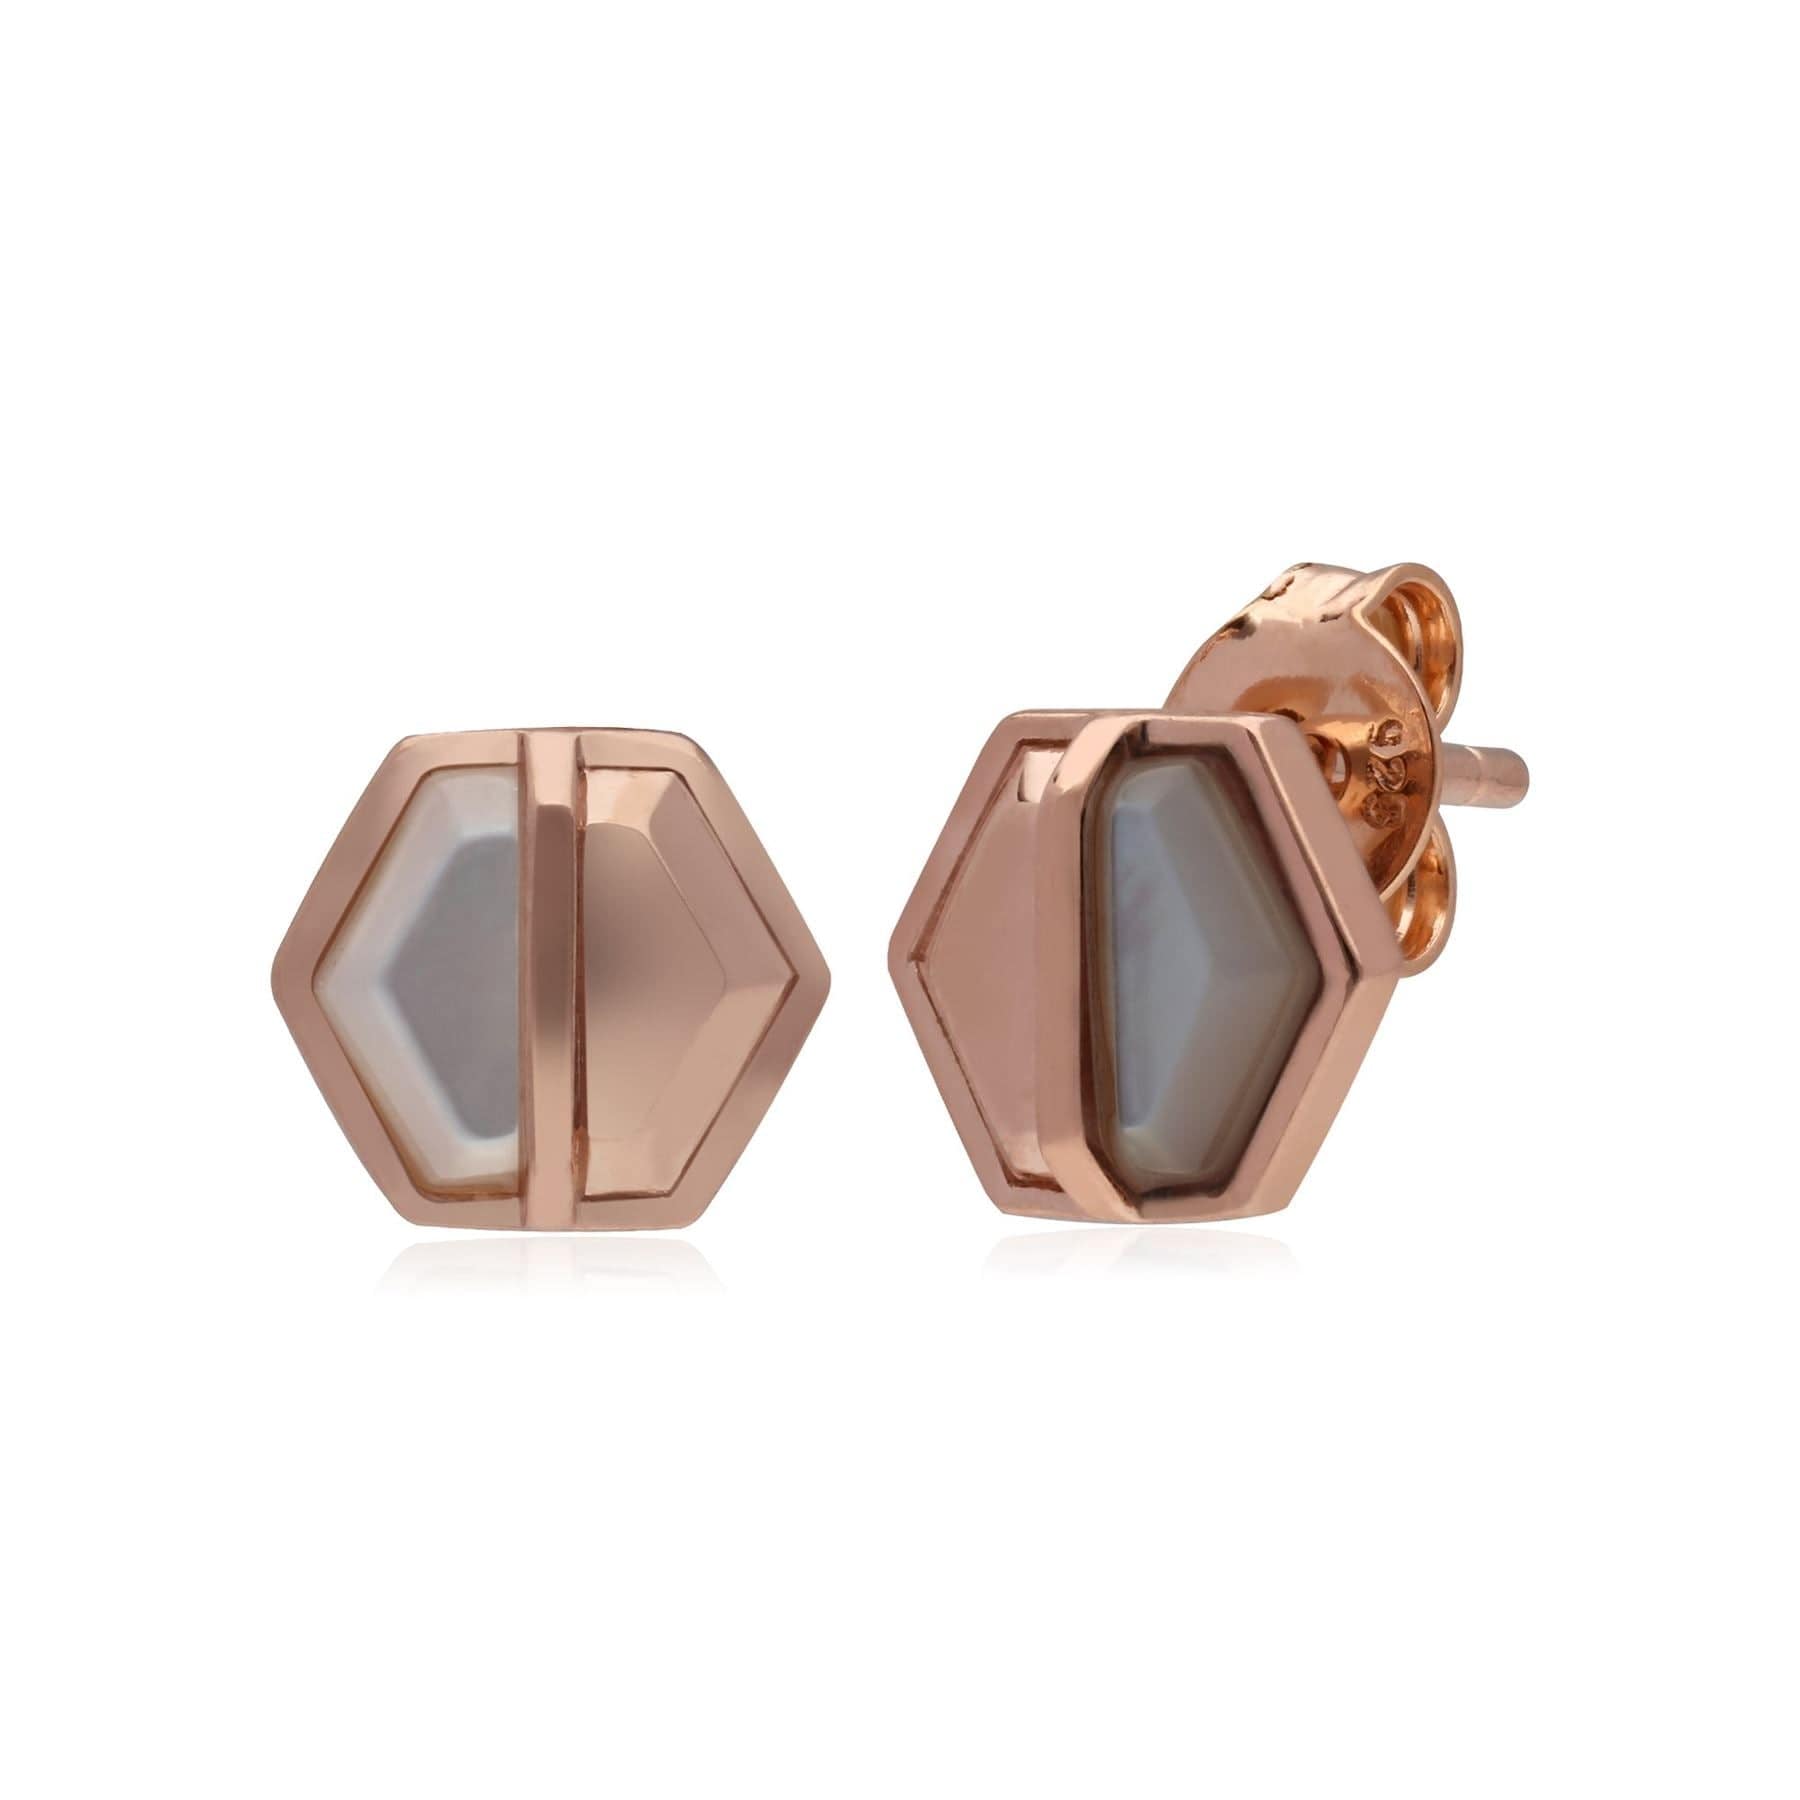 Micro Statement Mother of Pearl Hexagon Stud Earrings in Rose Gold Plated Silver